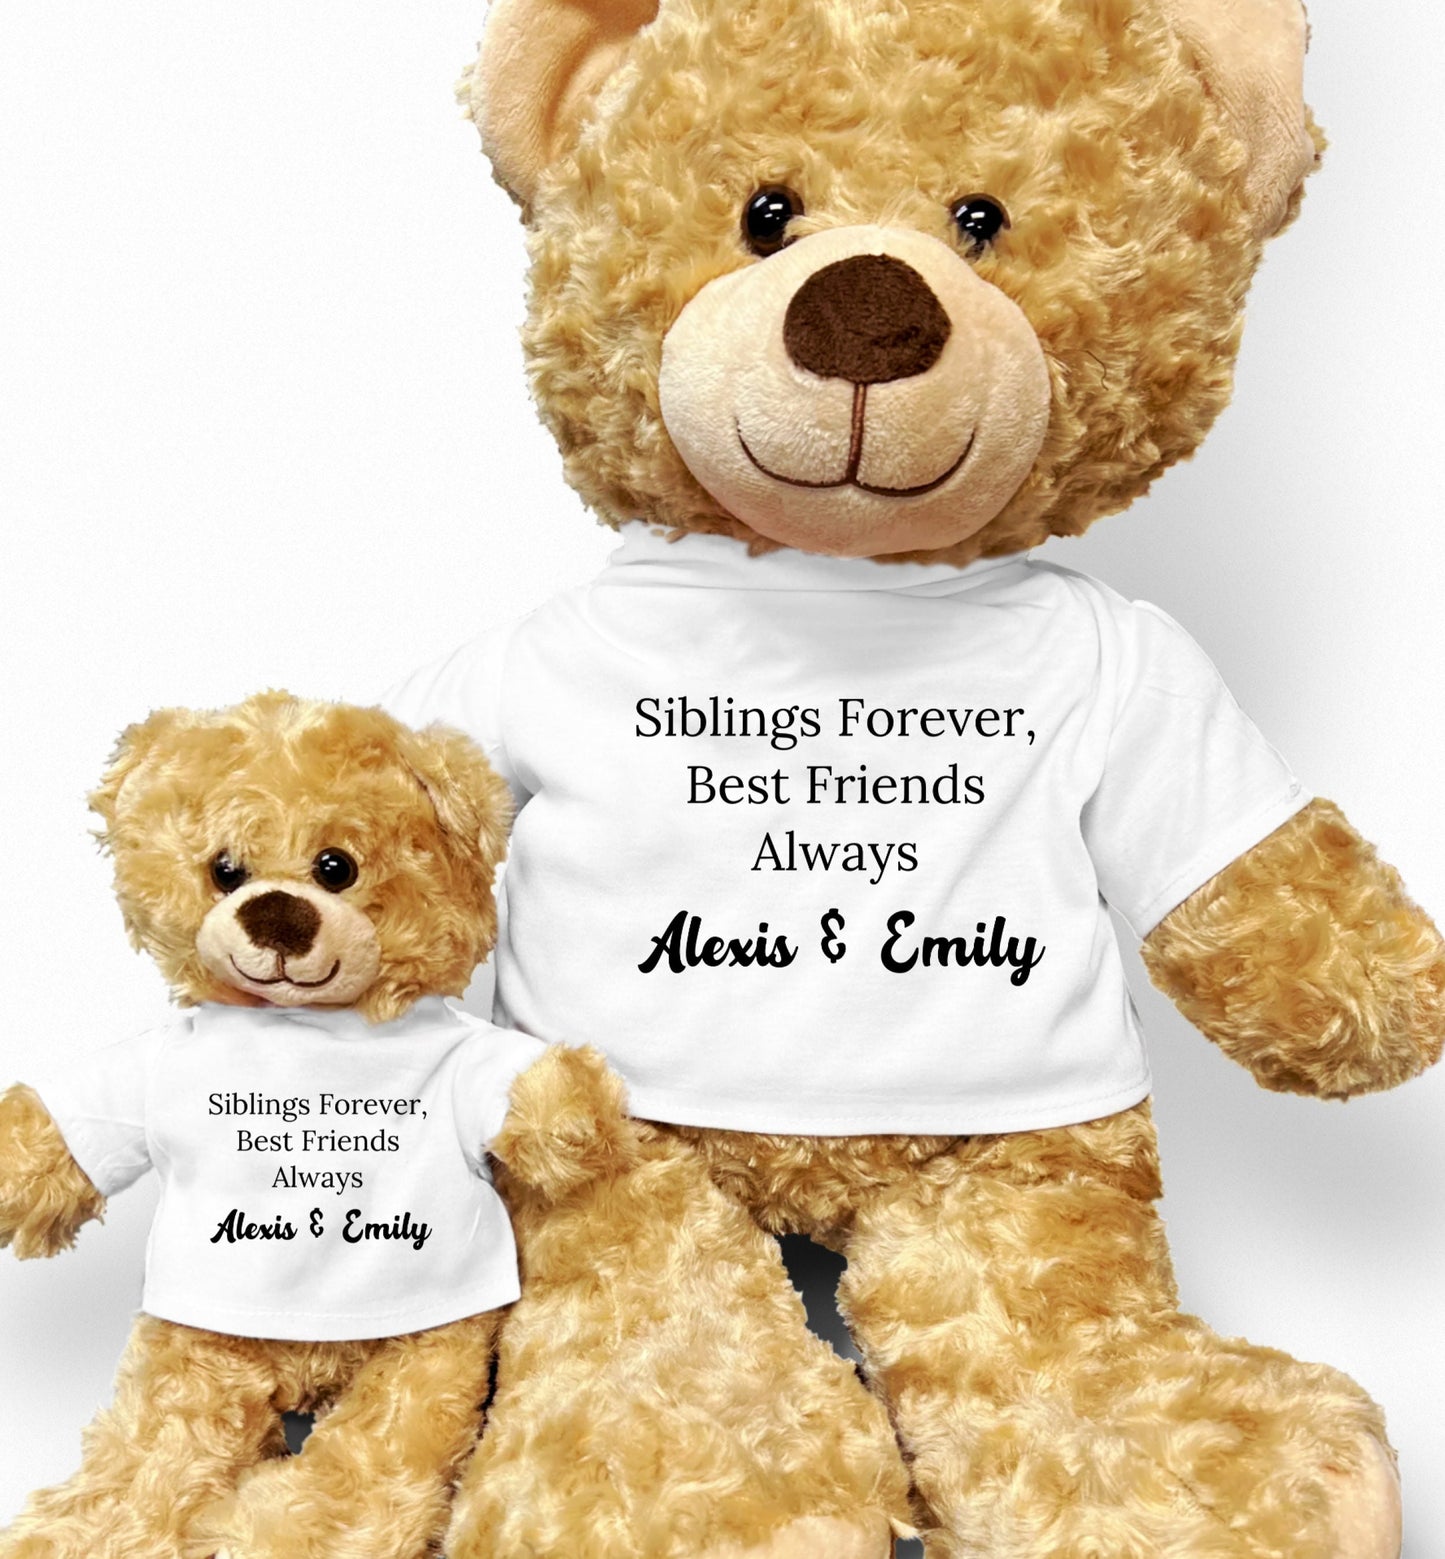 Personalized Sibling Teddy Bear - Custom Name for a Unique Gift, Plush Brother Teddy Bear, Birthday Girl, Sister Teddy Bear